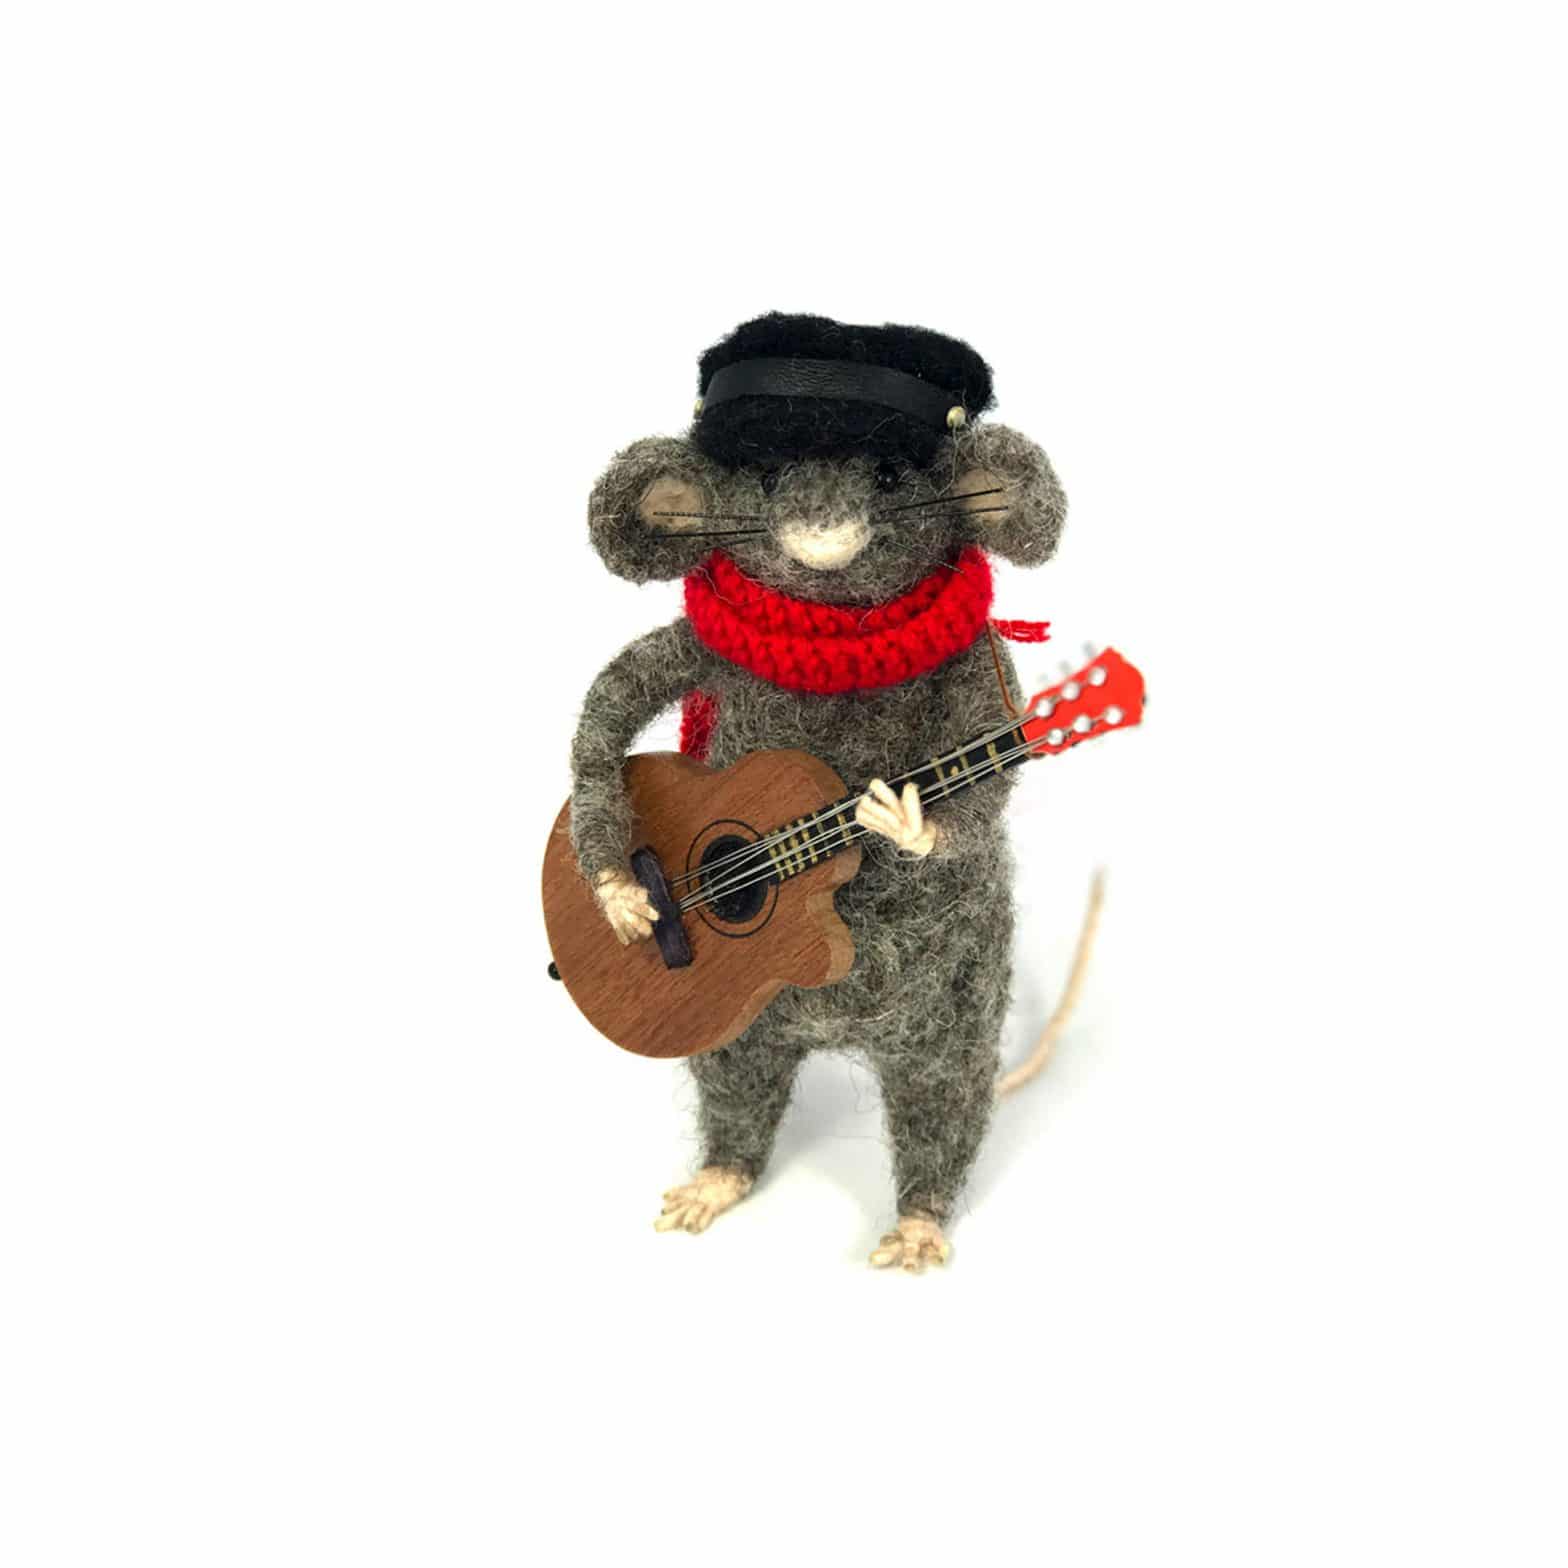 a card design of a needle-felted mouse playing a guitar